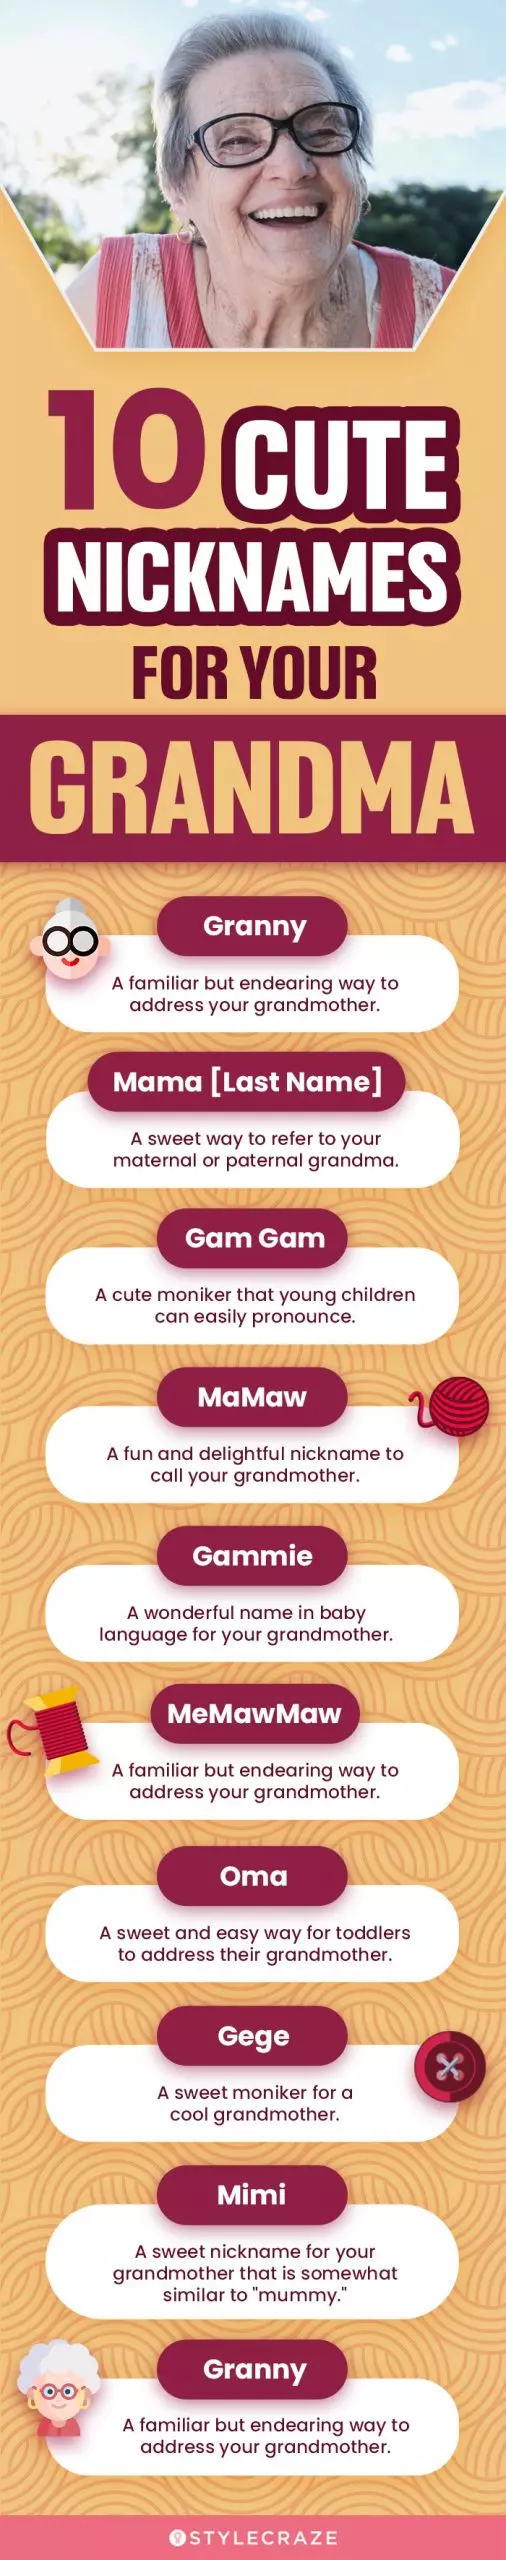 10 cute nicknames for your grandma (infographic)